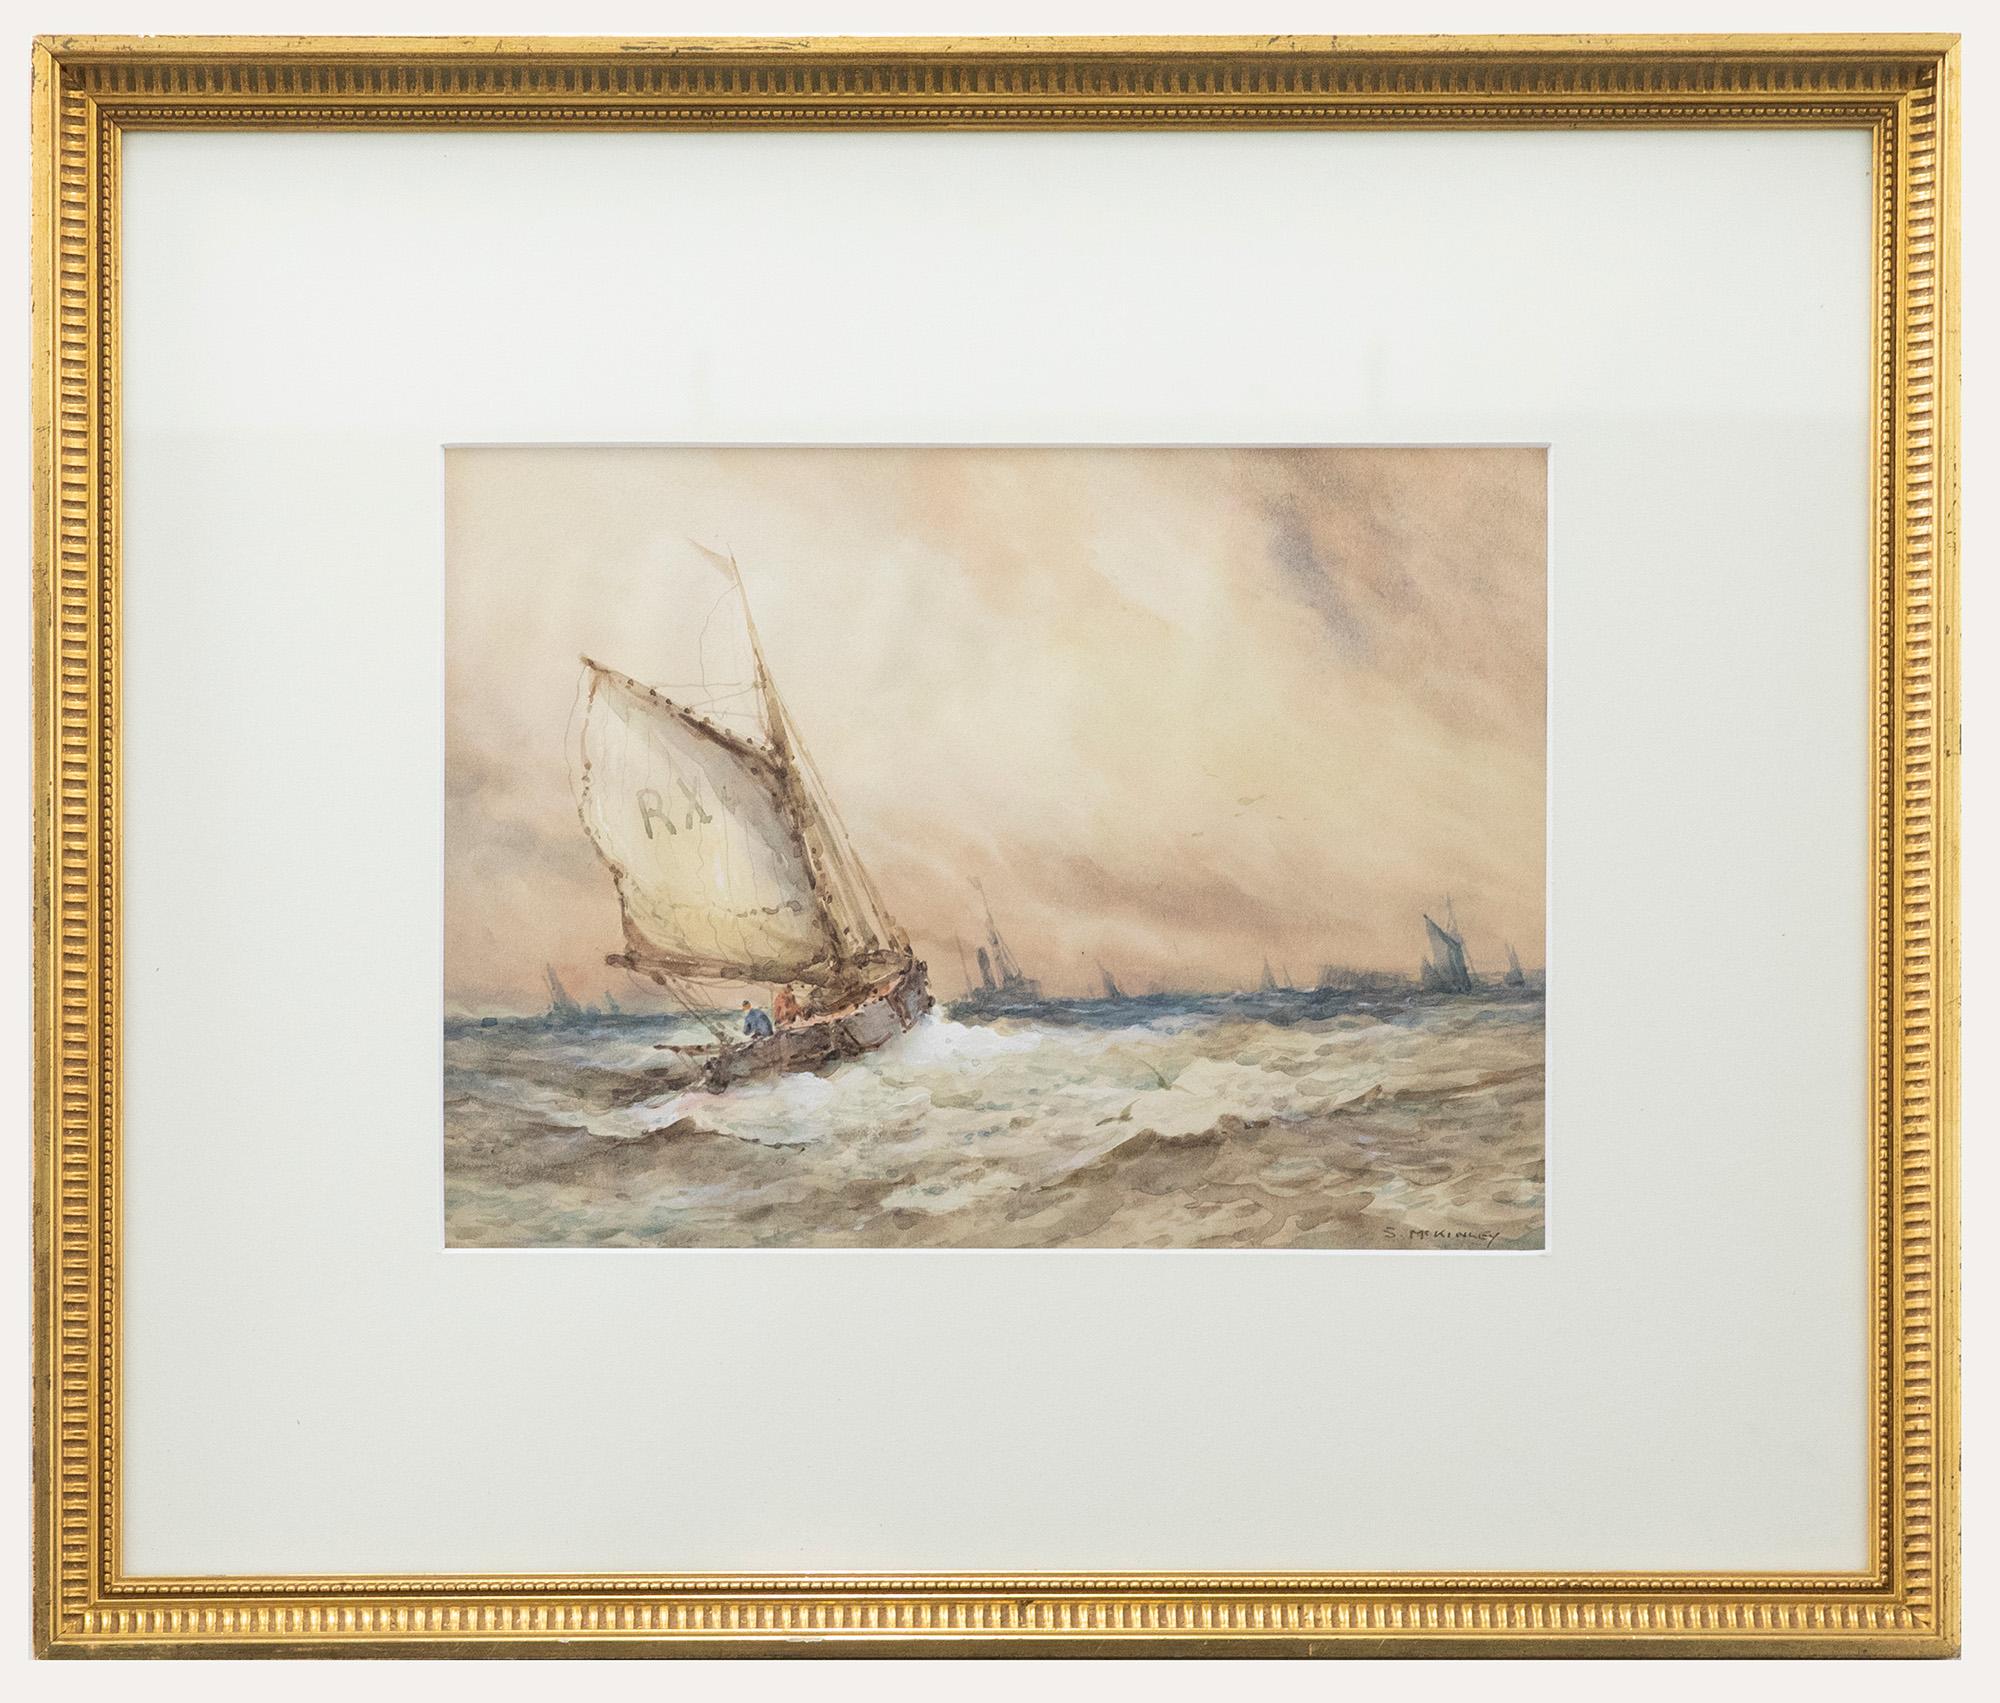 Unknown Figurative Art - S. McKinley (b.1920) - Framed Mid 20th Century Watercolour, Riding Sea Waves